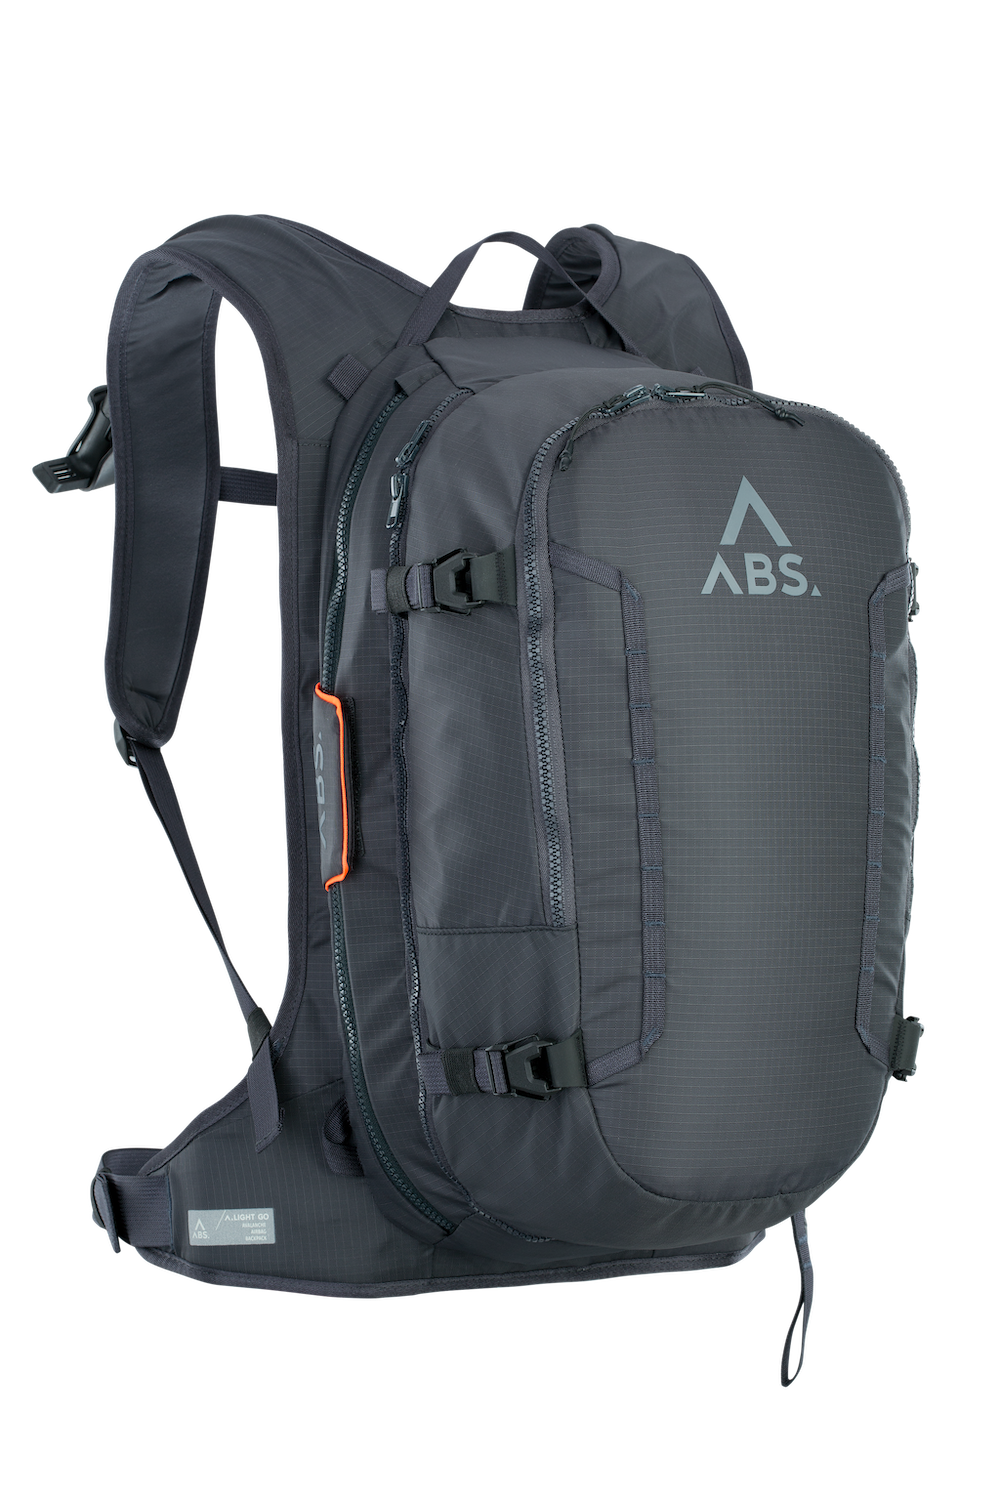 Avalanche Airbags | ABS